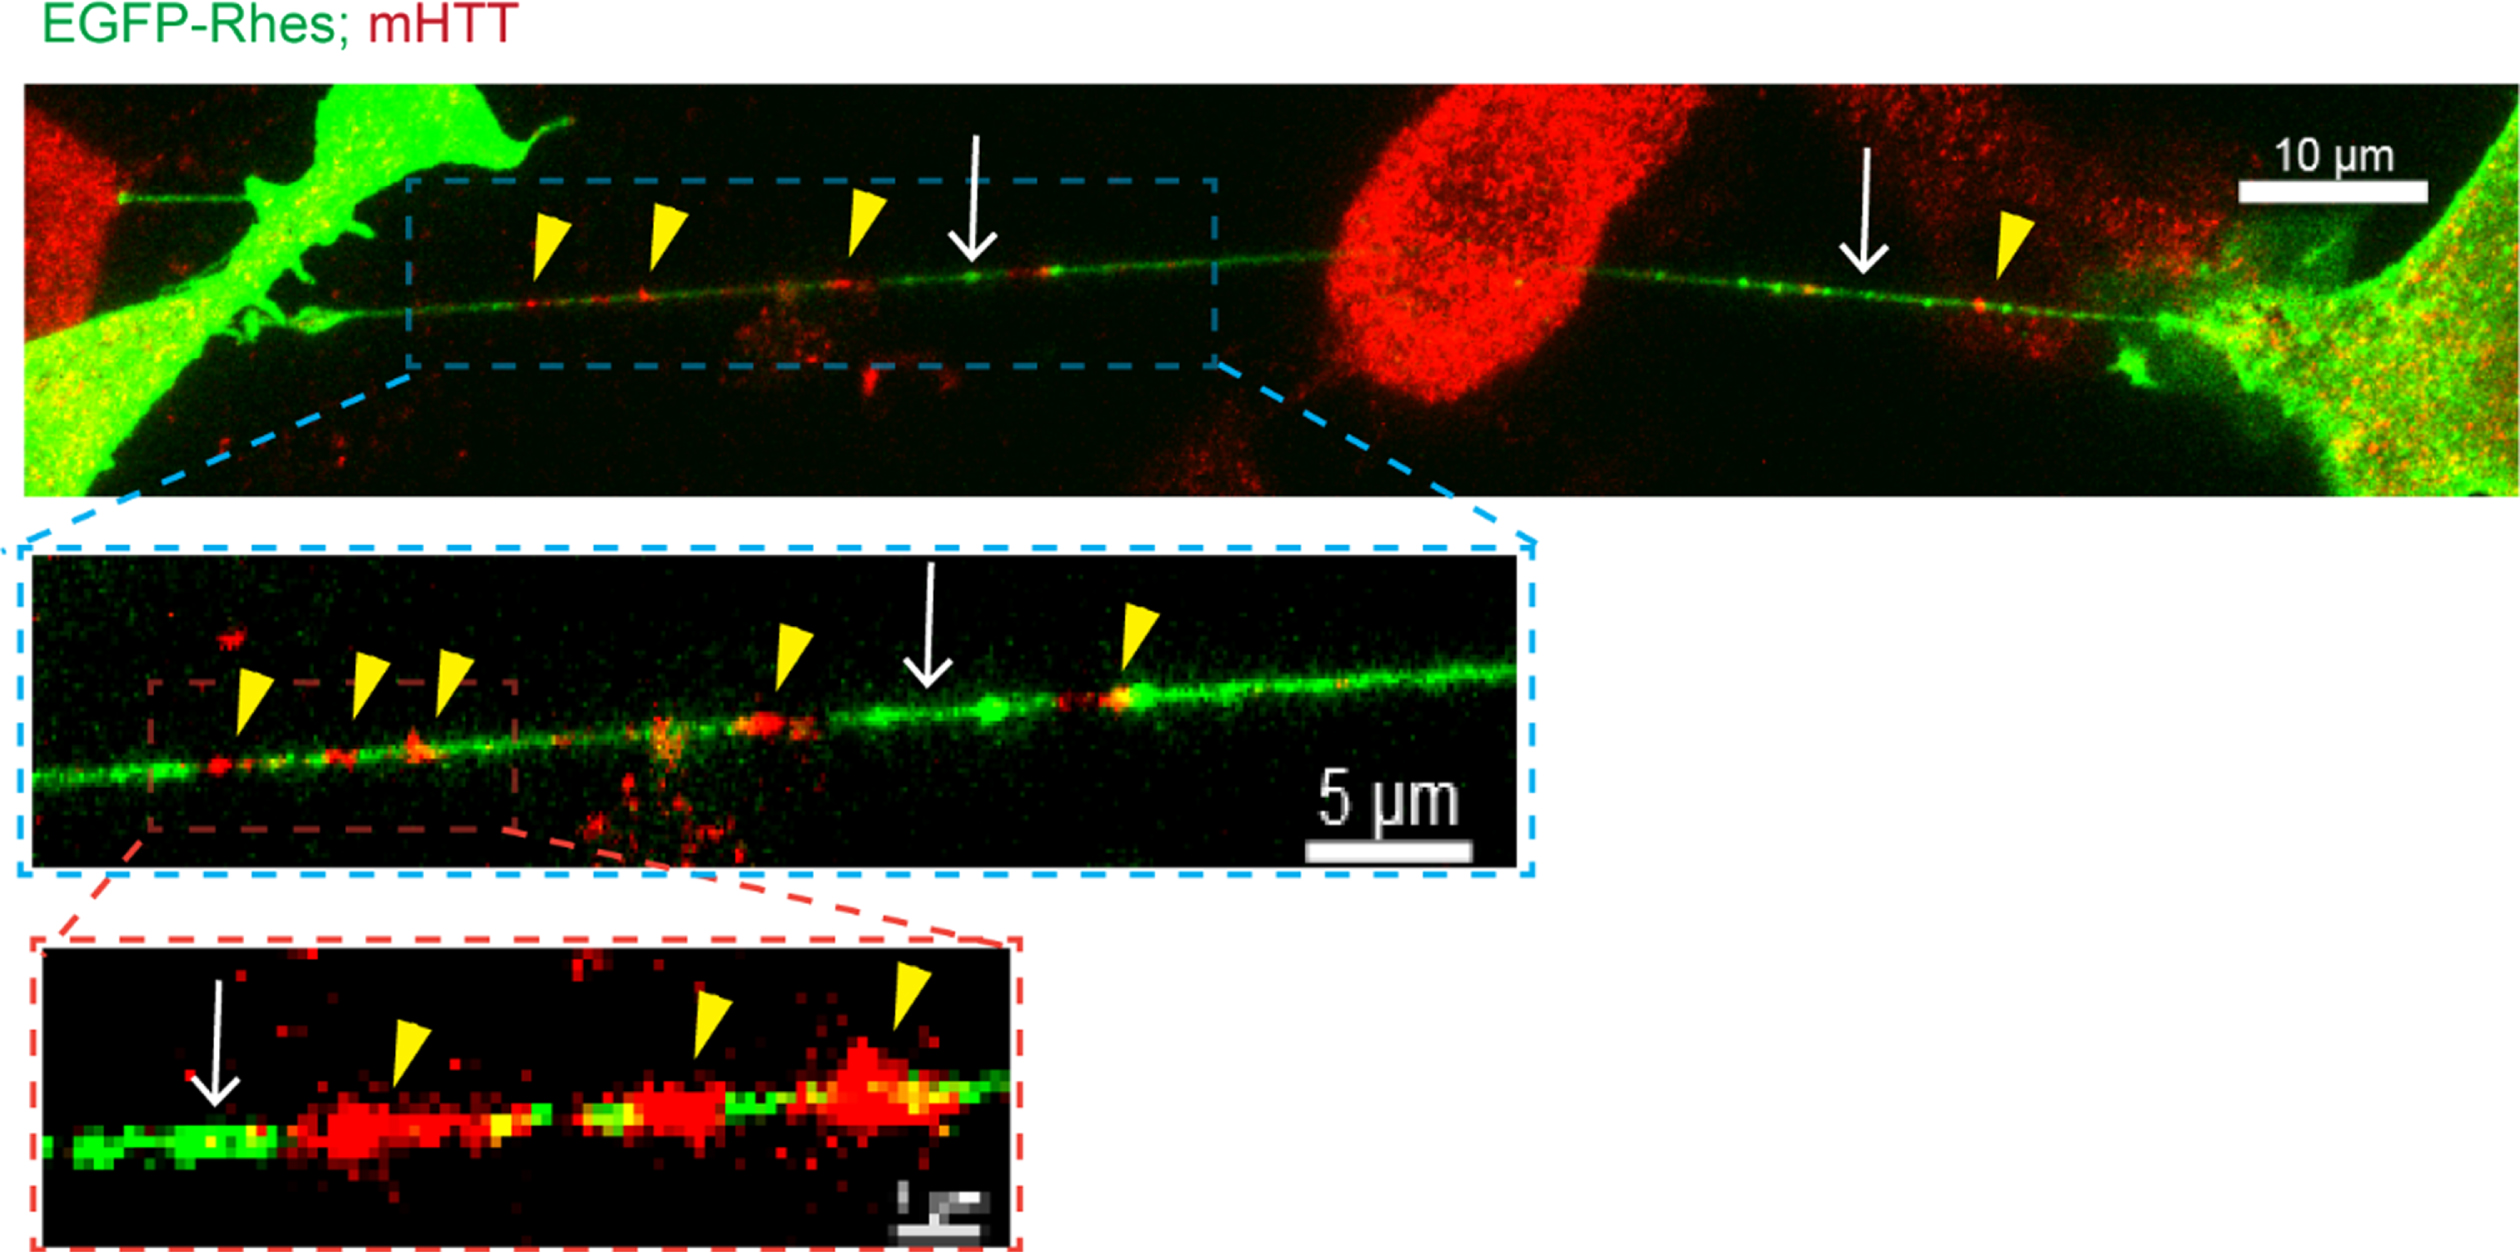 Rhes transports mHTT via TNT-like protrusions. Confocal images of EGFP-Rhes in mutant striatal cells (STHdhQ111/Q111) with immunocyto-chemistry for endogenous FL mutant HTT with anti-HTT MAB2166 antibody (Red). The arrow shows the TNT-like protrusion. Arrowhead shows mHTT in the TNTs.